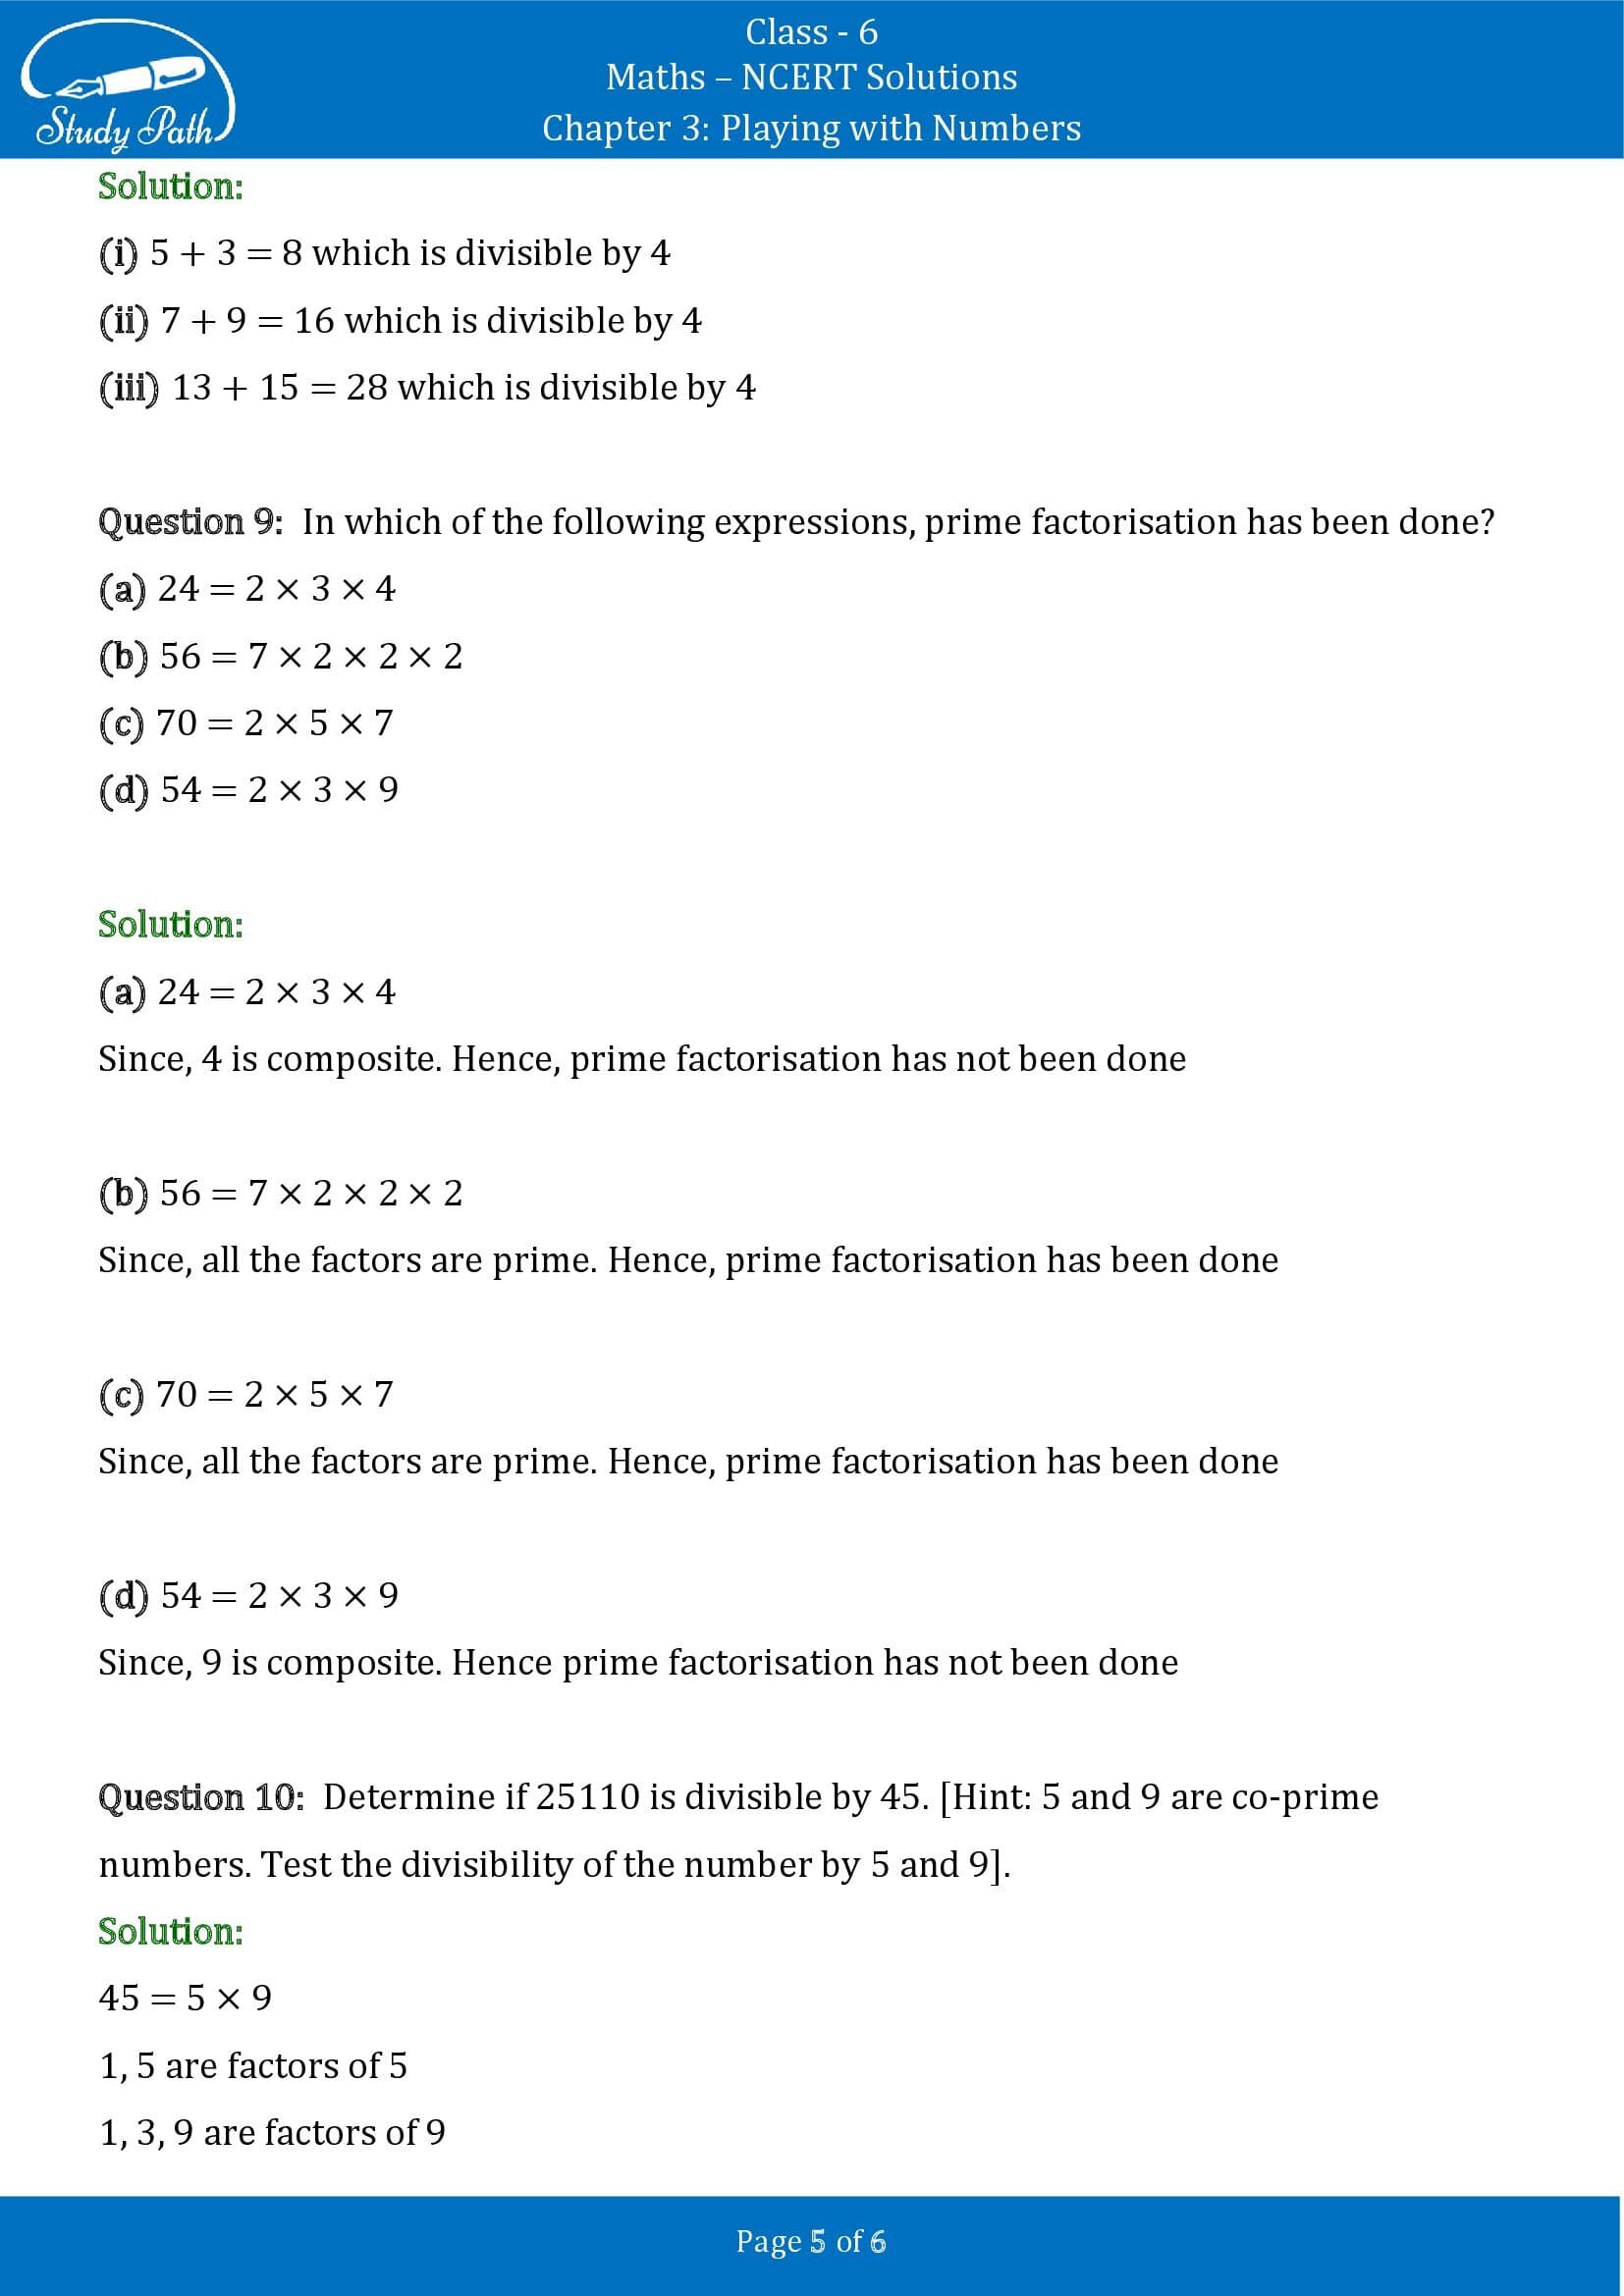 NCERT Solutions for Class 6 Maths Chapter 3 Playing with Numbers Exercise 3.5 00005